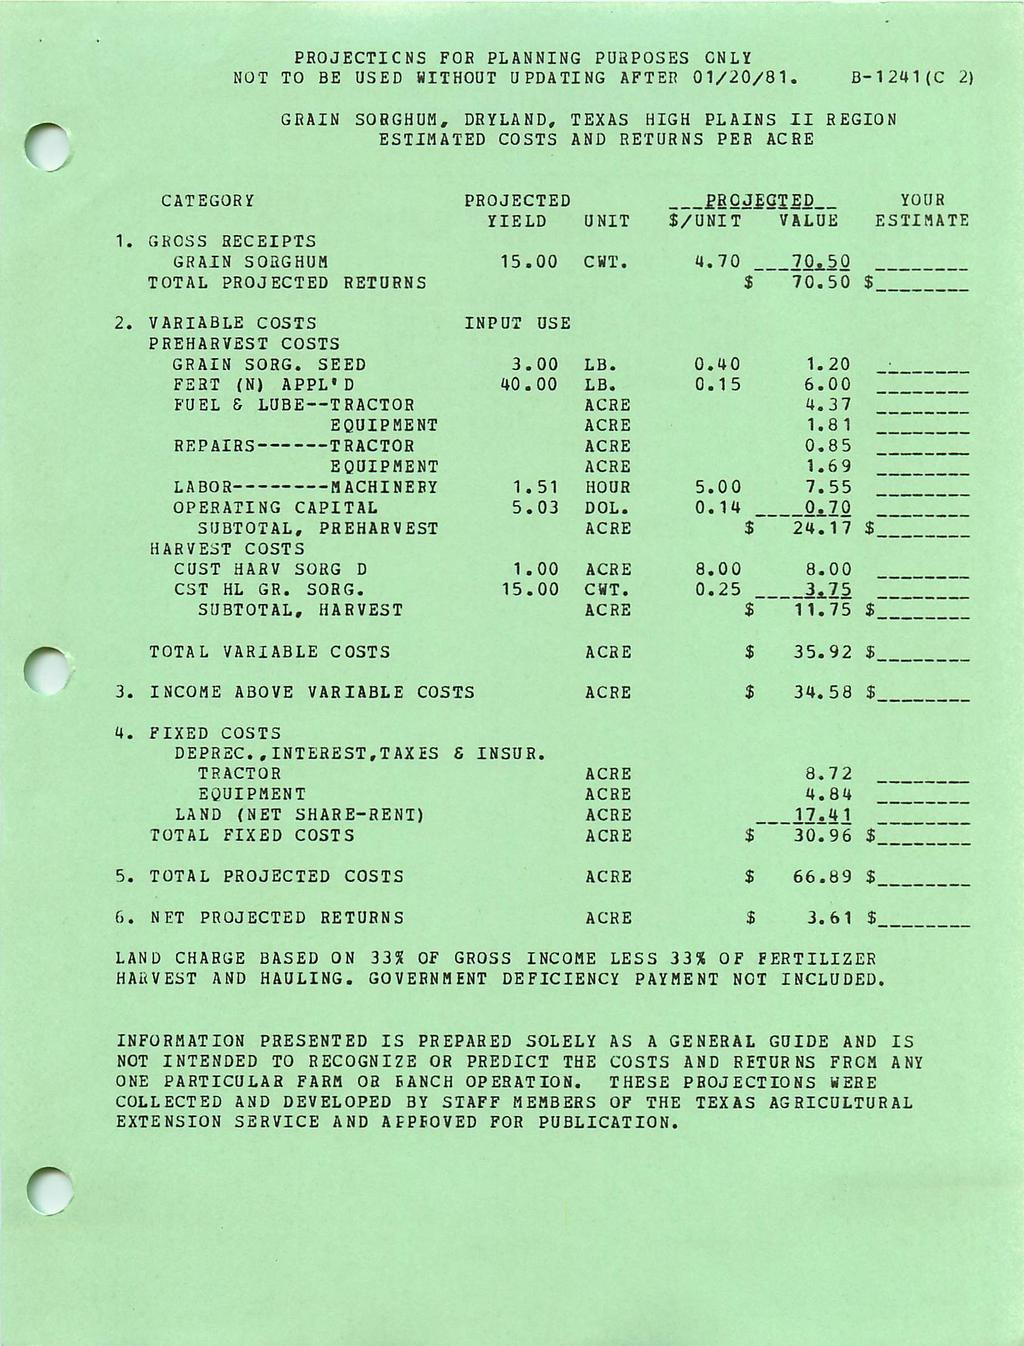 PROJECTIONS FOR PLANNING PURPOSES ONLY NOT TO BE USED WITHOUT UPDATING AFTER 01/20/81 B1241 (C 2) " GRAIN SORGHUM, DRYLAND, TEXAS HIGH PLAINS II REGION ESTIMATED COSTS AND RETURNS PER CATEGORY